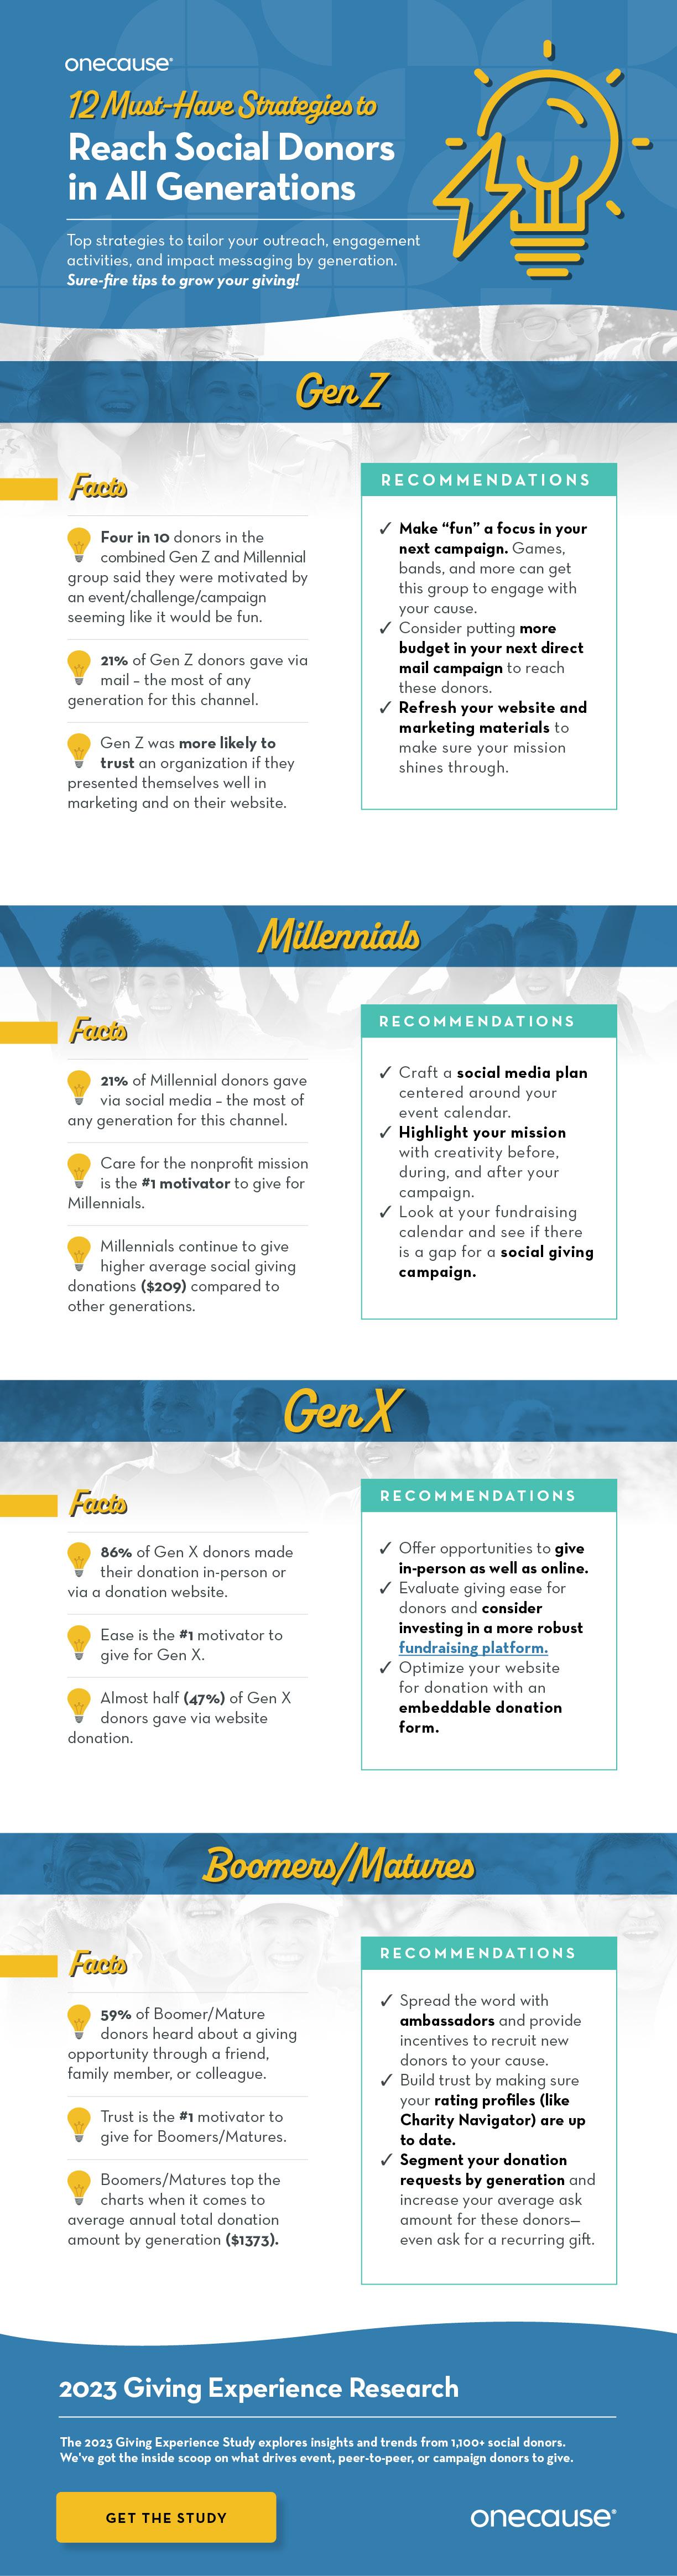 Infographic titled "12 Must-Have Strategies to Reach Social Donors in All Generations" by OneCause for engaging different generations.